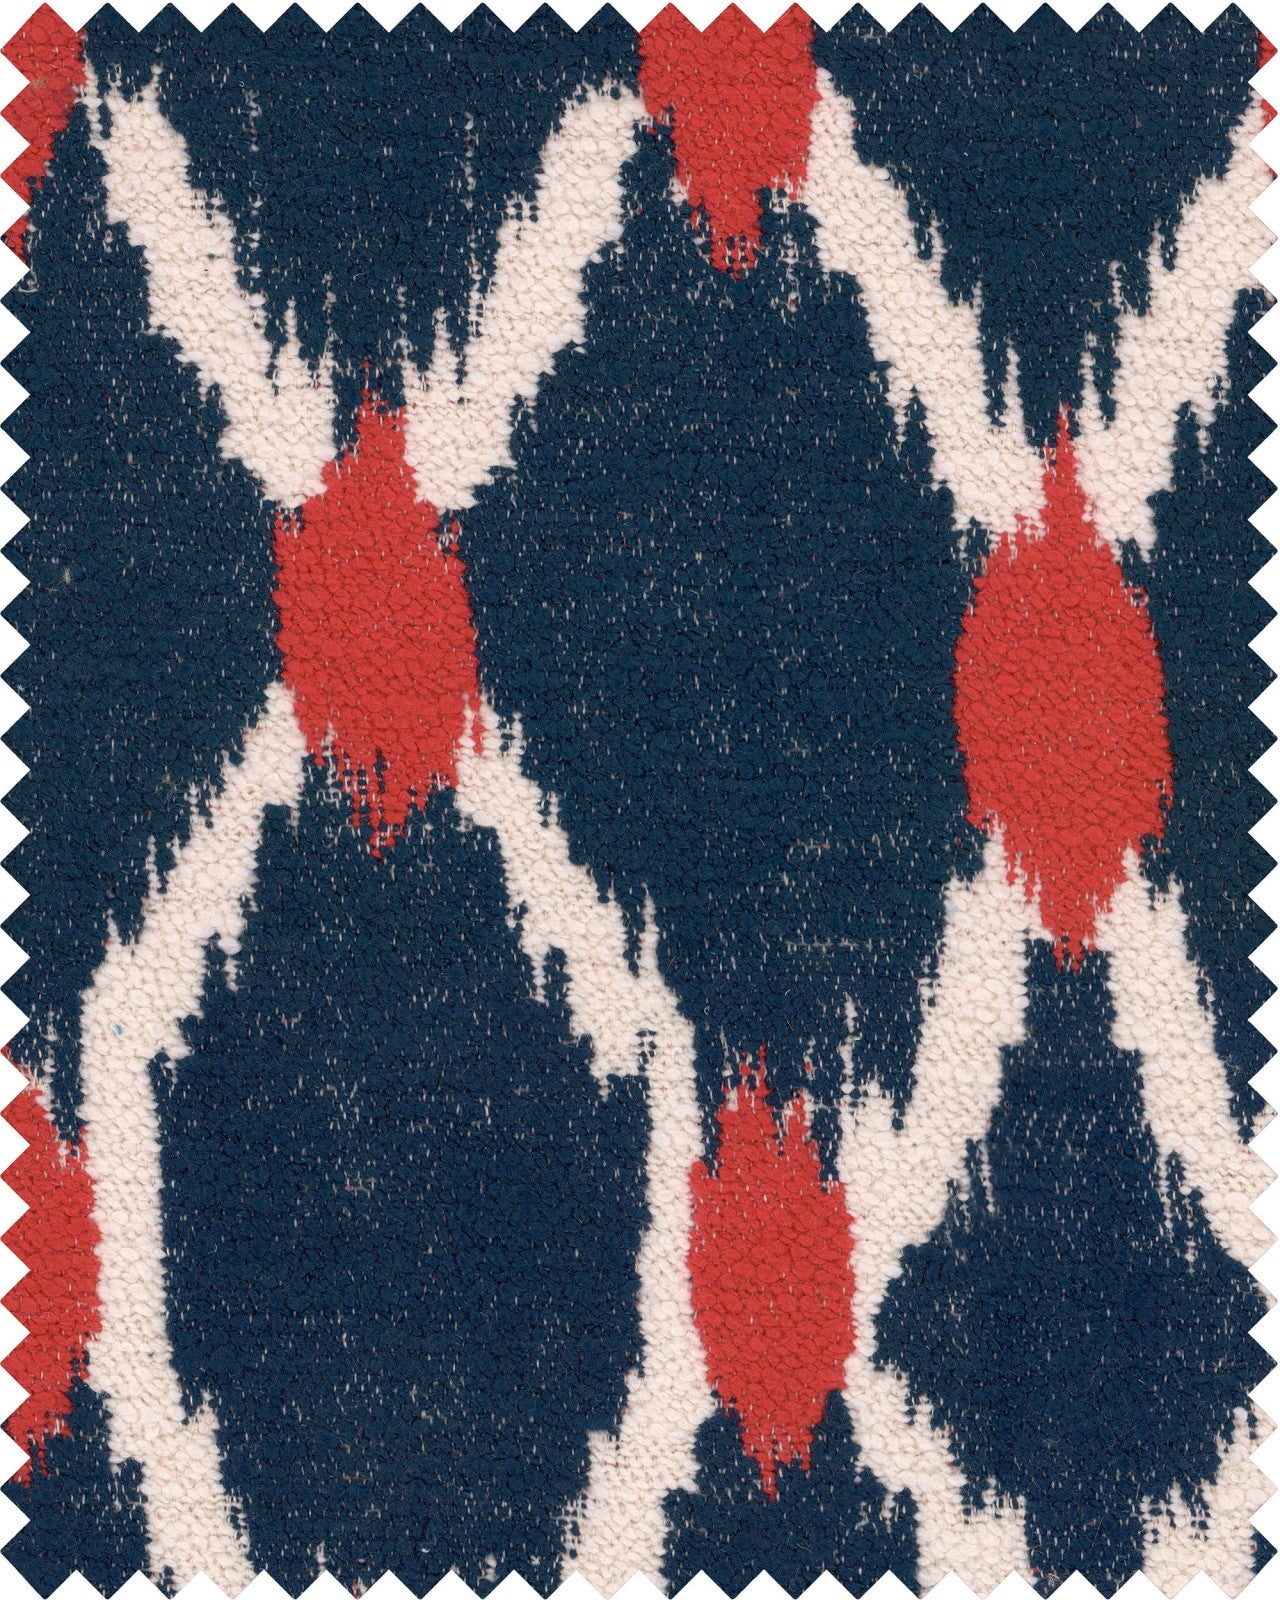 Seebensee fabric in blue red white color - pattern number FB00112 - by Mind The Gap in the Tyrol Apres-ski Home Collection collection